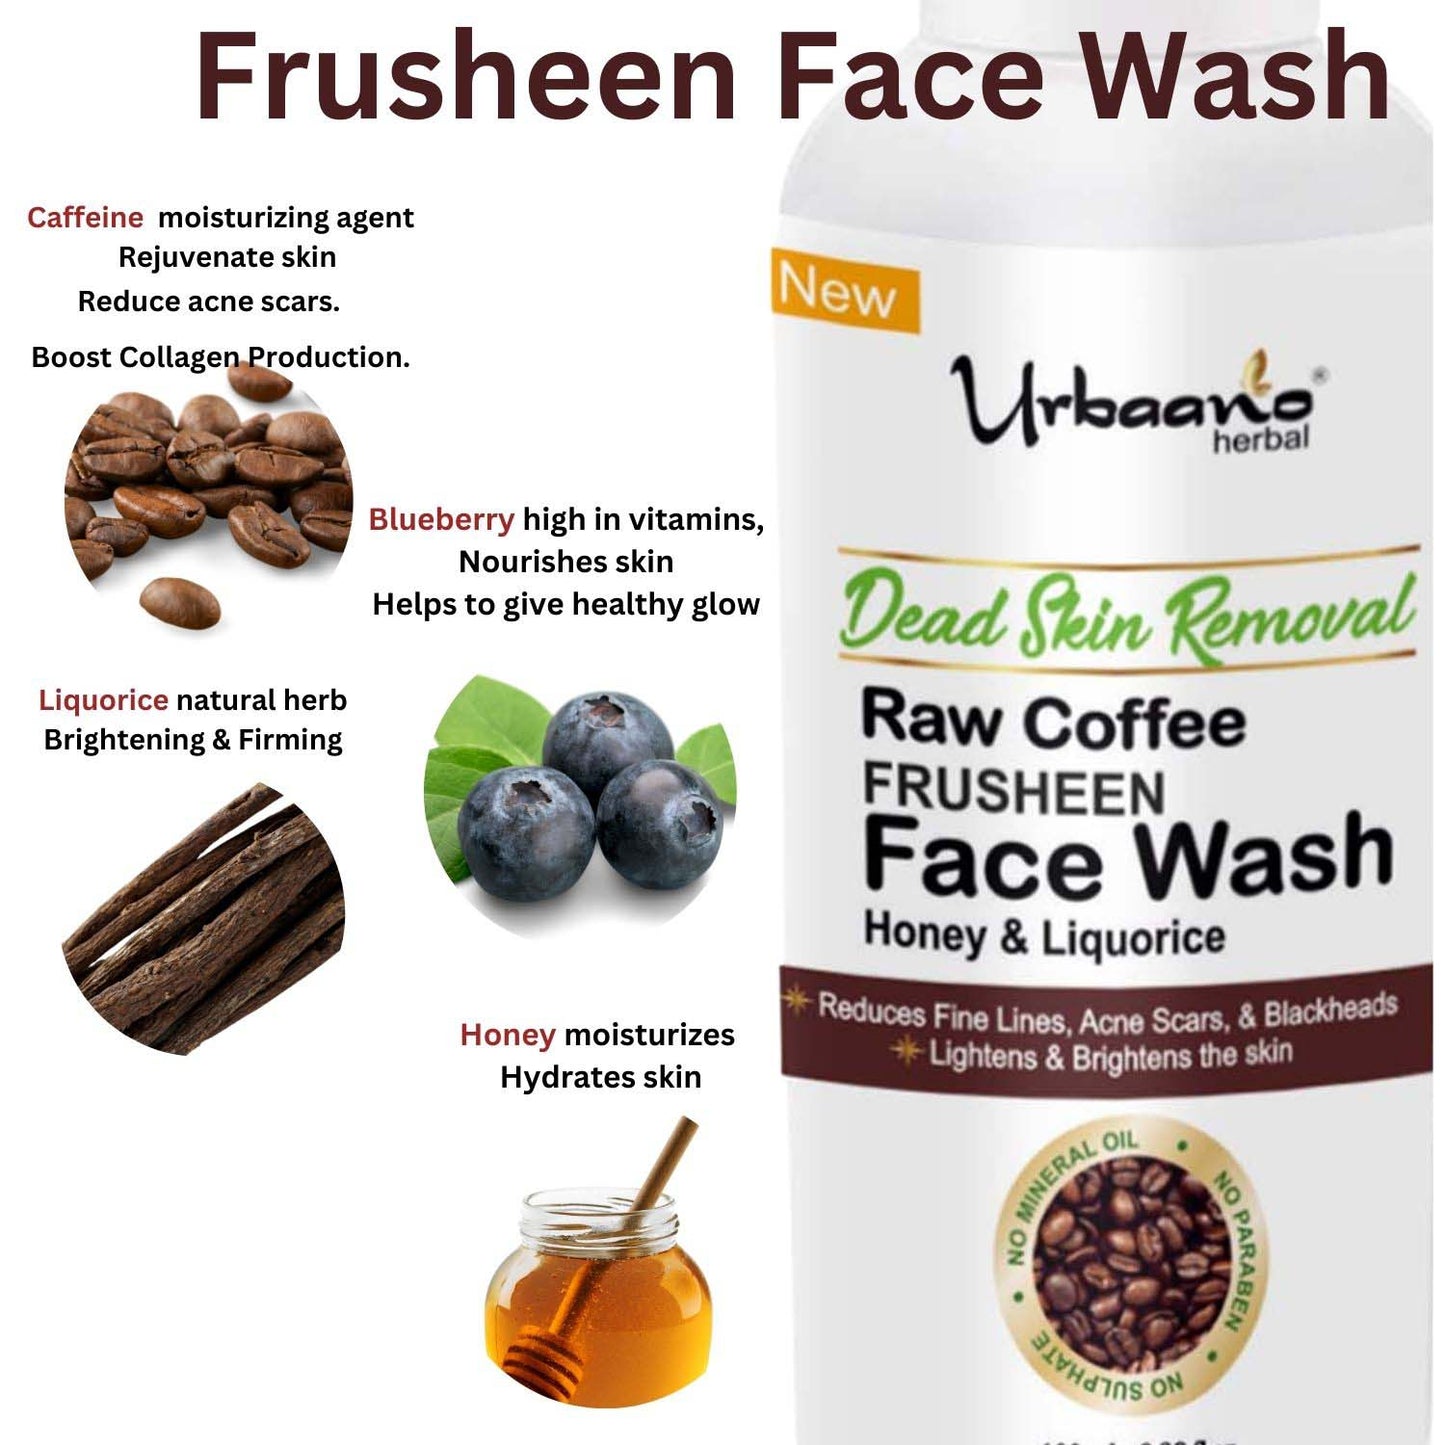 urbaano herbal frusheen face wash raw coffee for dead skin removal, anti acne, skin lightening, reduce fine lines, age spots with honey & liquorice